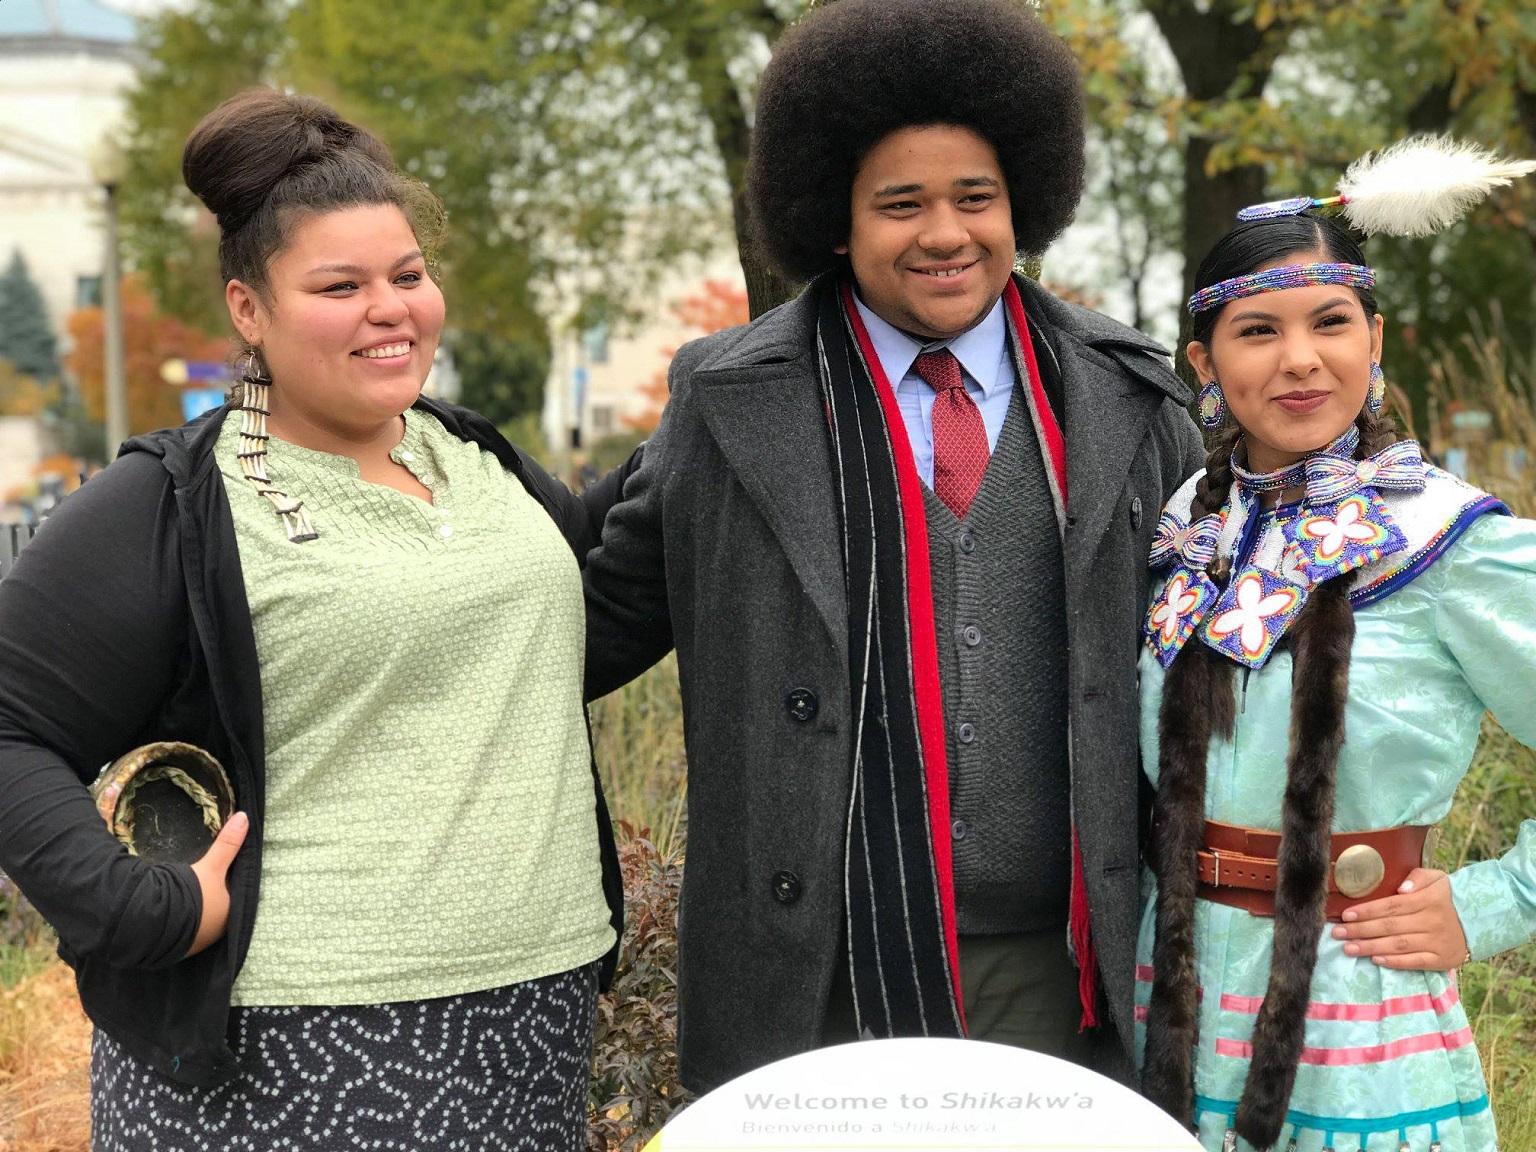 Members of several Native American tribes attended a land acknowledgement ceremony on Oct. 26, 2018. (Courtesy The Field Museum)